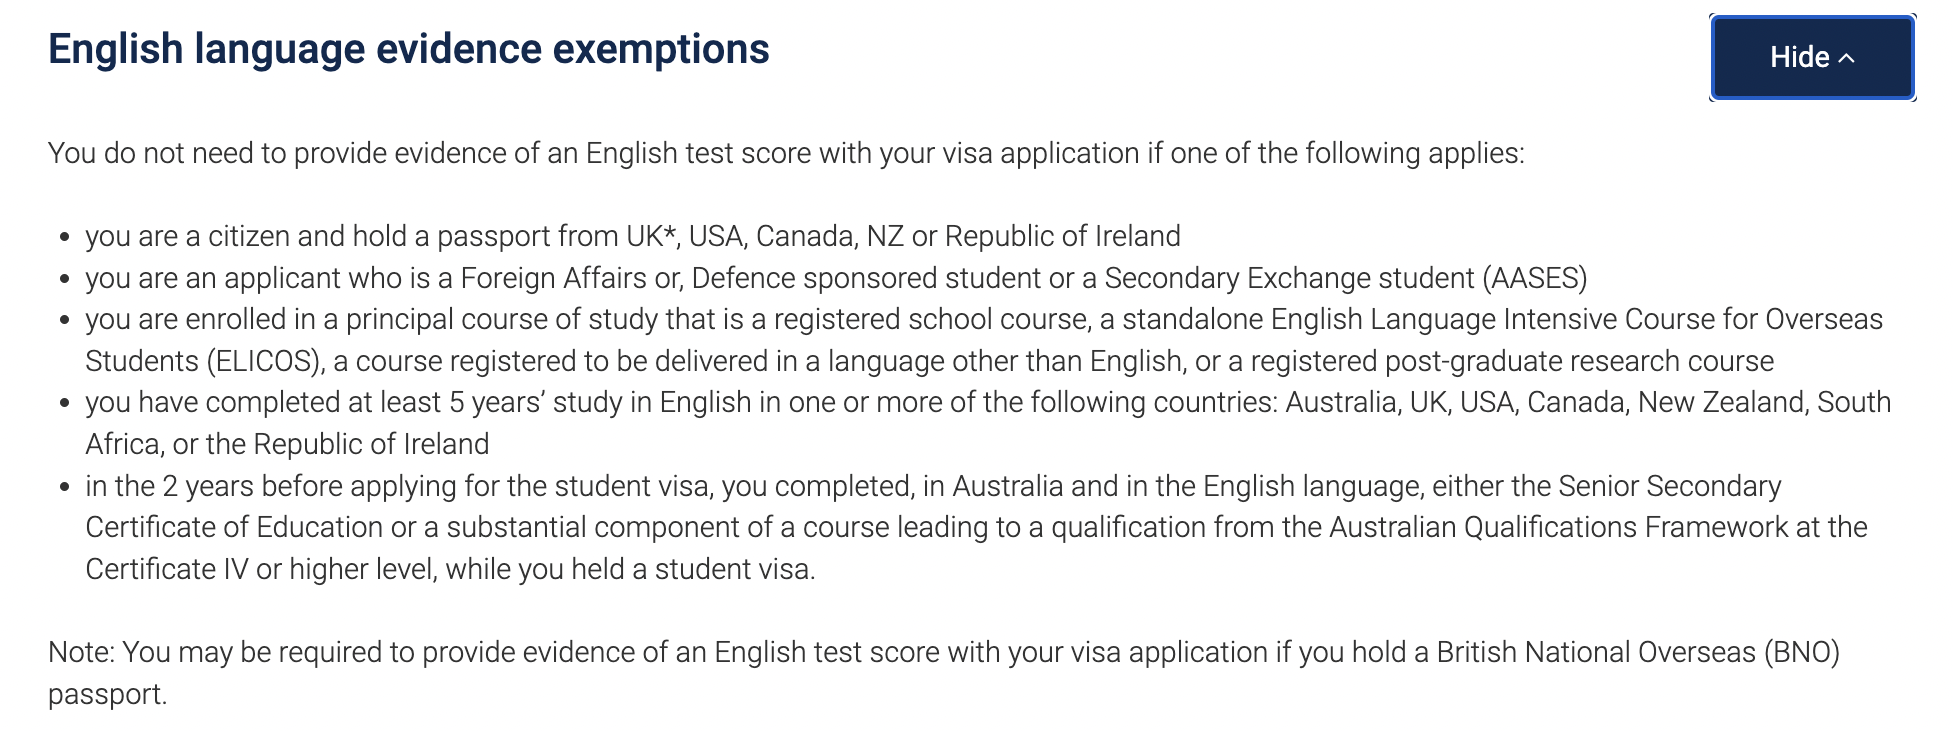 English Language Requirements to Get a Student Visa for Australia